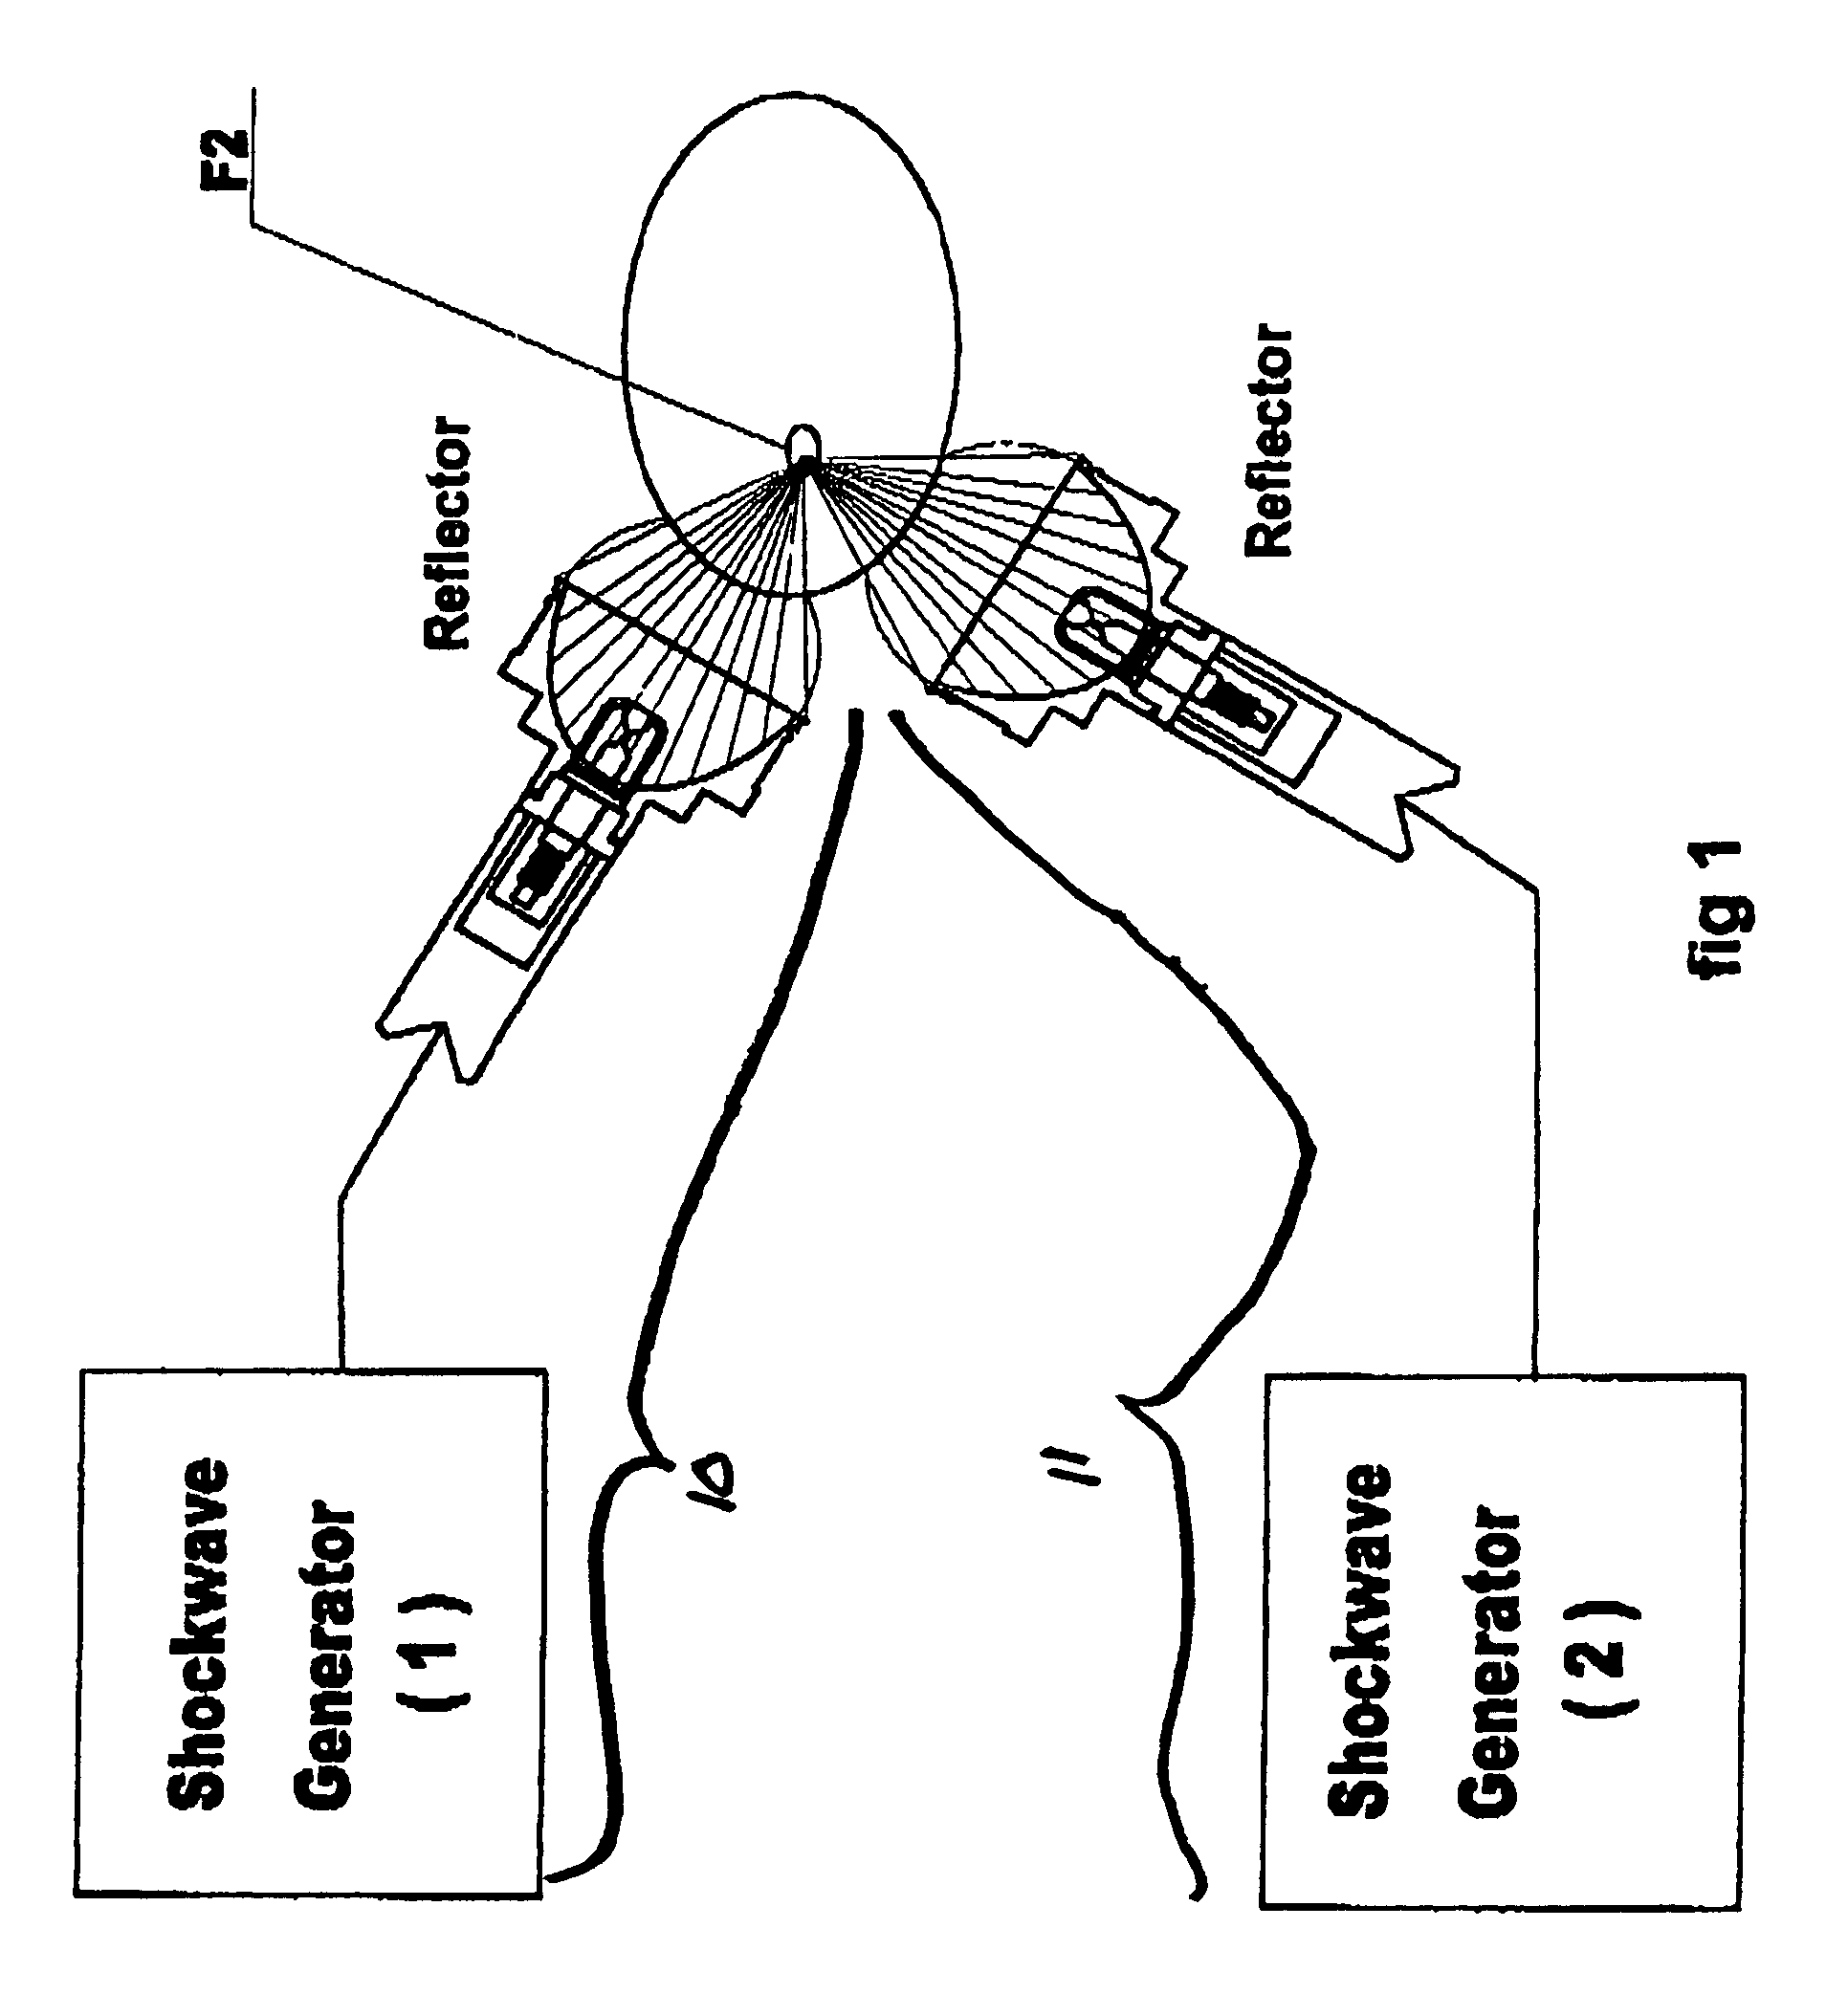 Multiple shockwave focal treatment apparatus with targeting positioning and locating apparatus